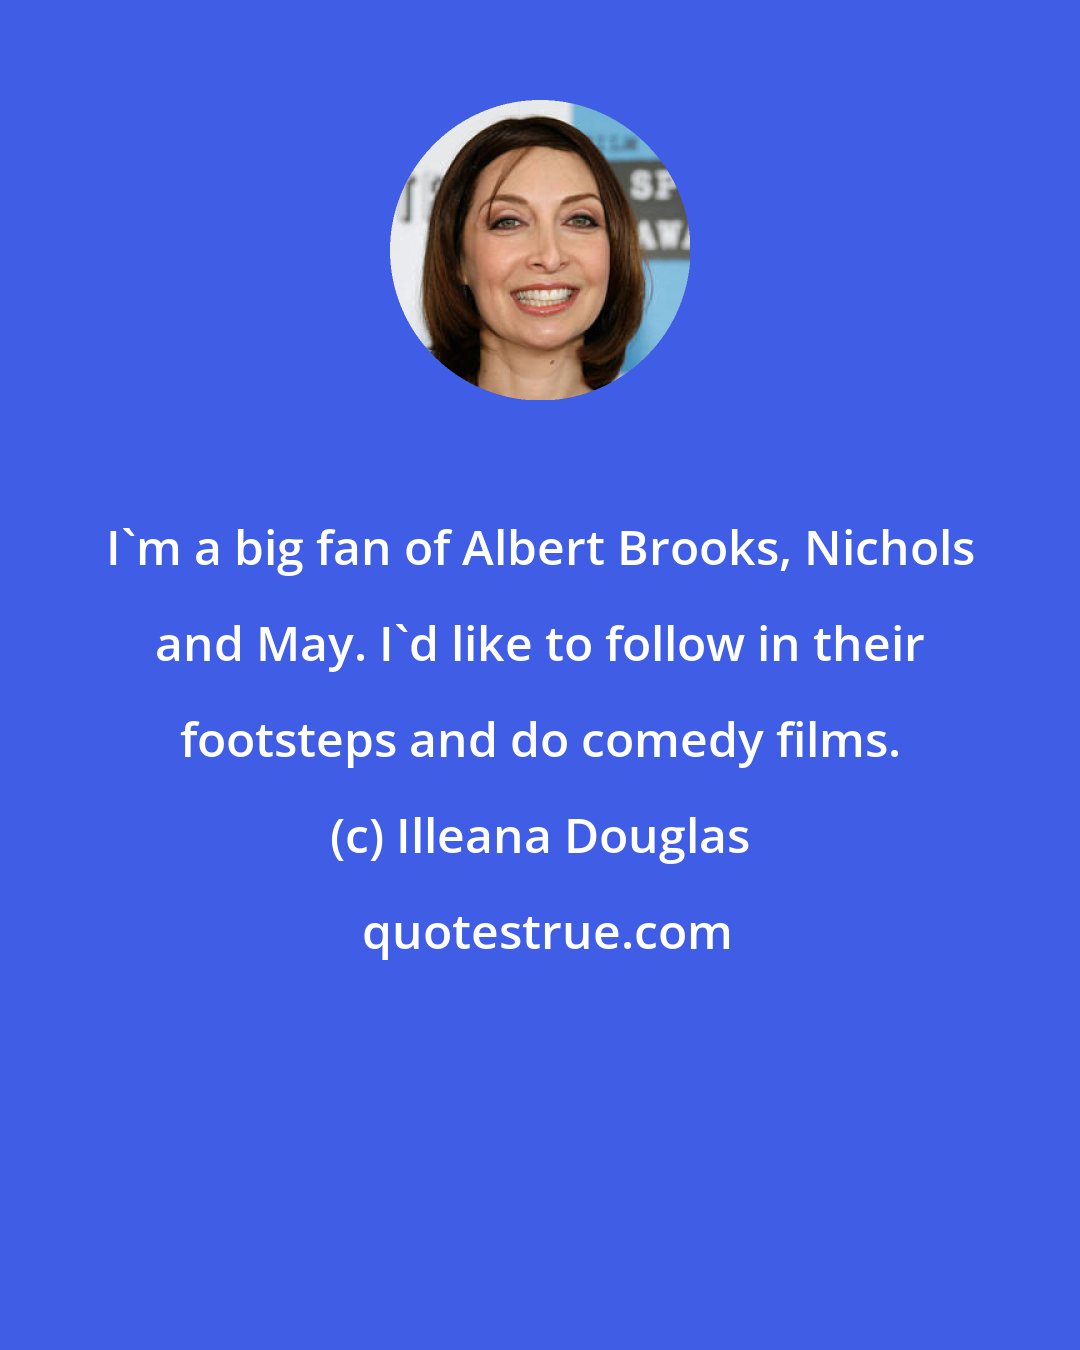 Illeana Douglas: I'm a big fan of Albert Brooks, Nichols and May. I'd like to follow in their footsteps and do comedy films.